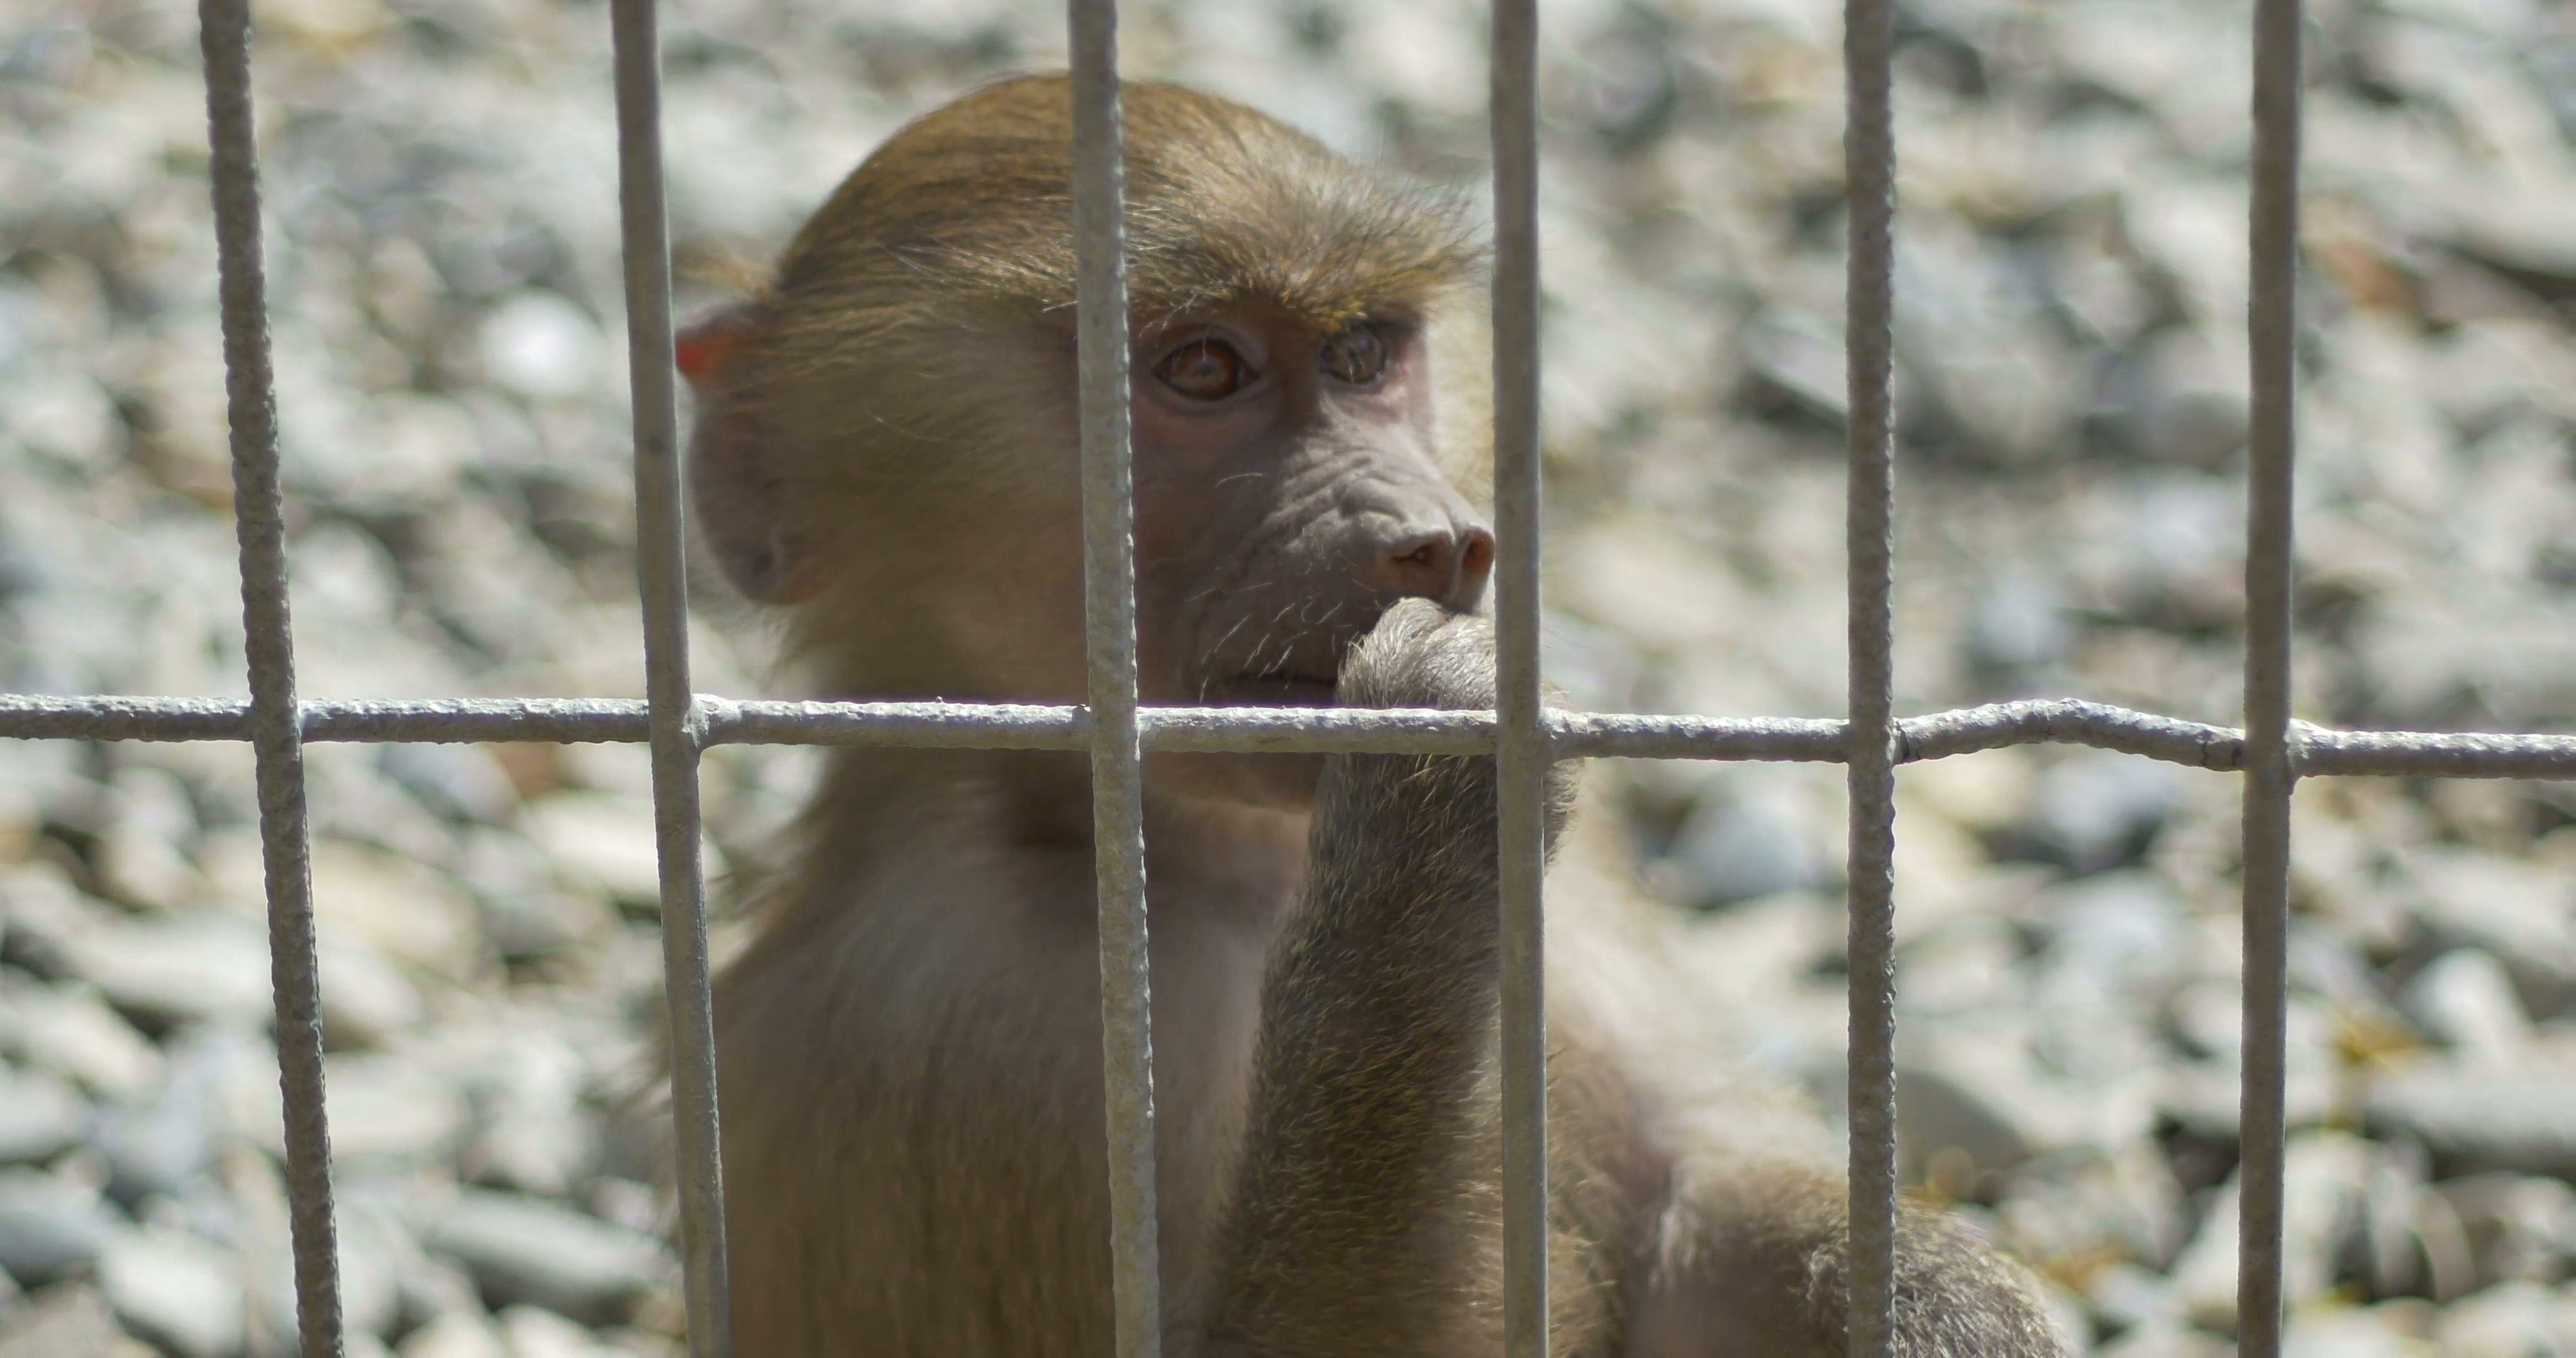 Close up of a baby monkey eating a nut after the bars, living in ...